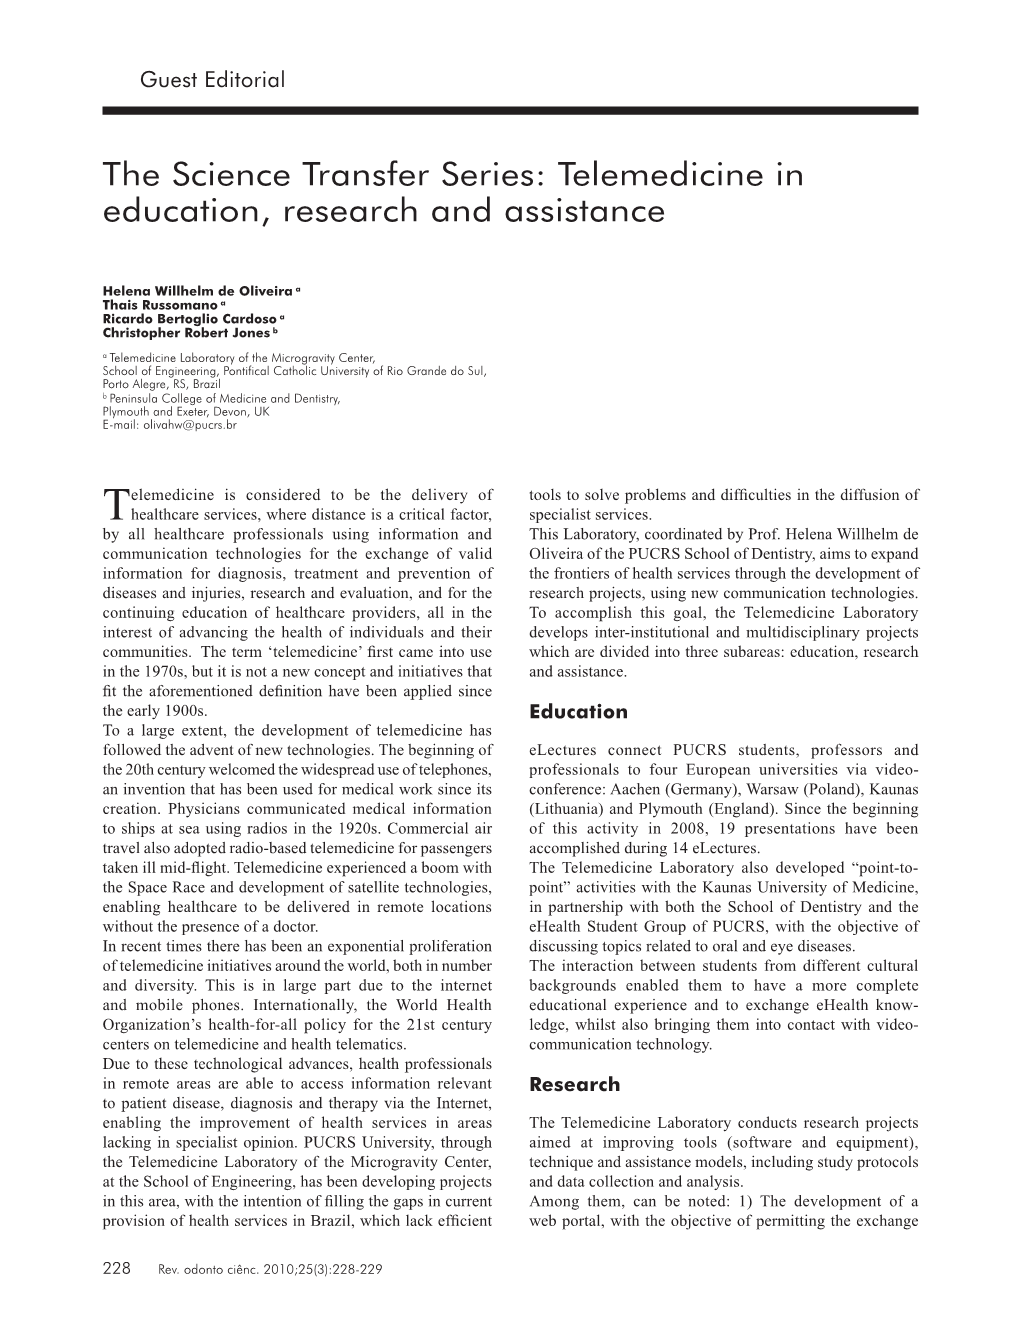 Telemedicine in Education, Research and Assistance